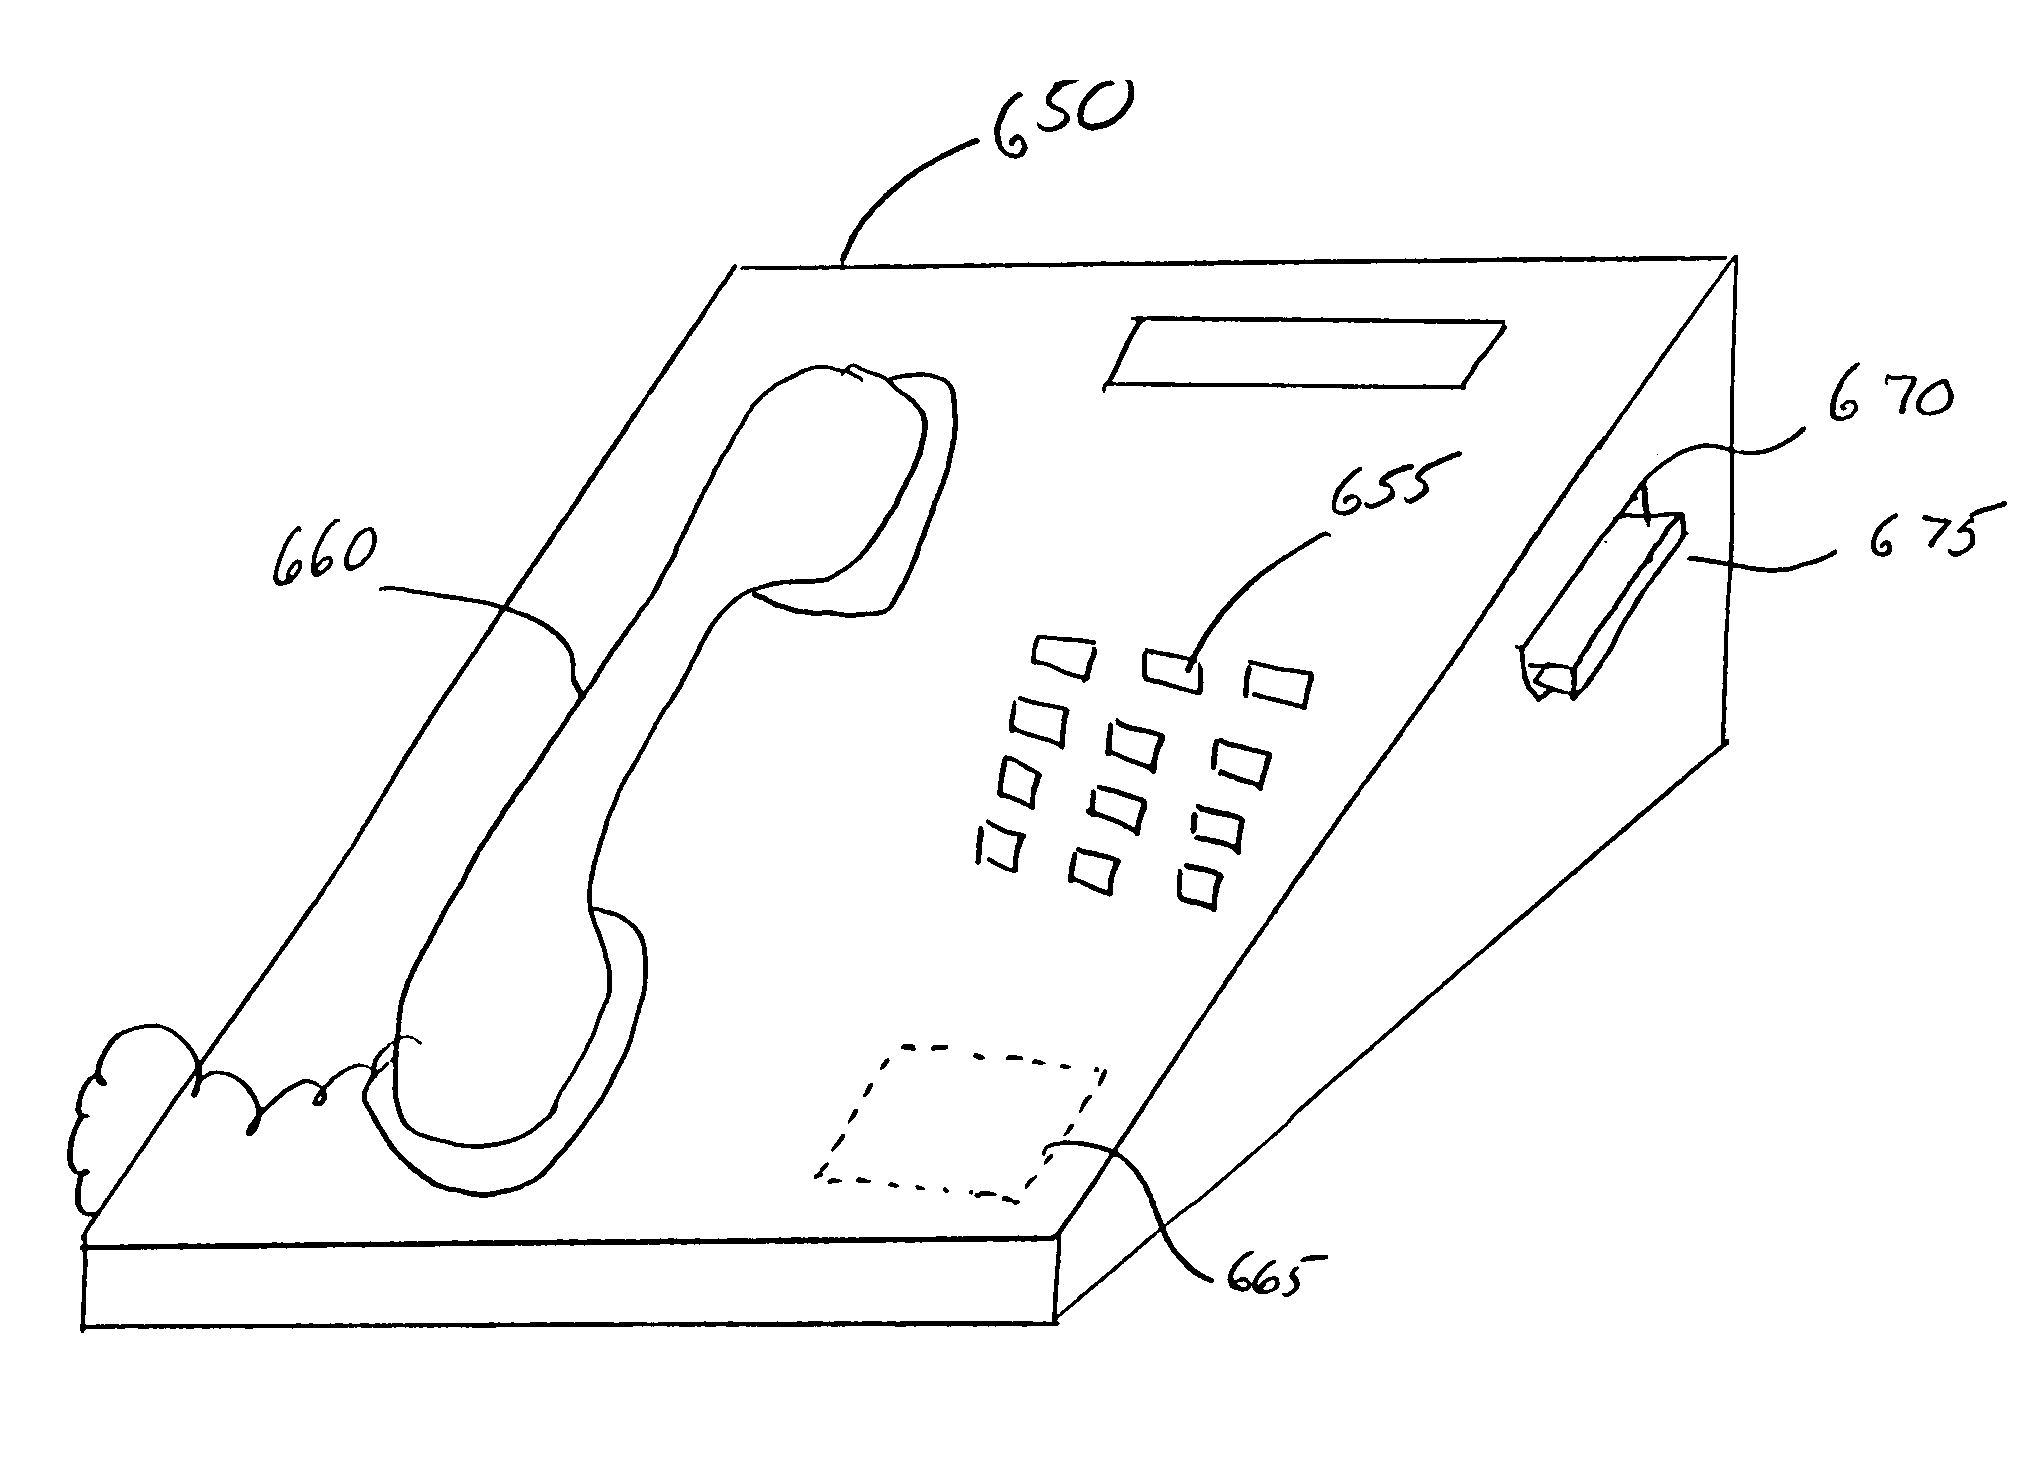 Personal communications system and method